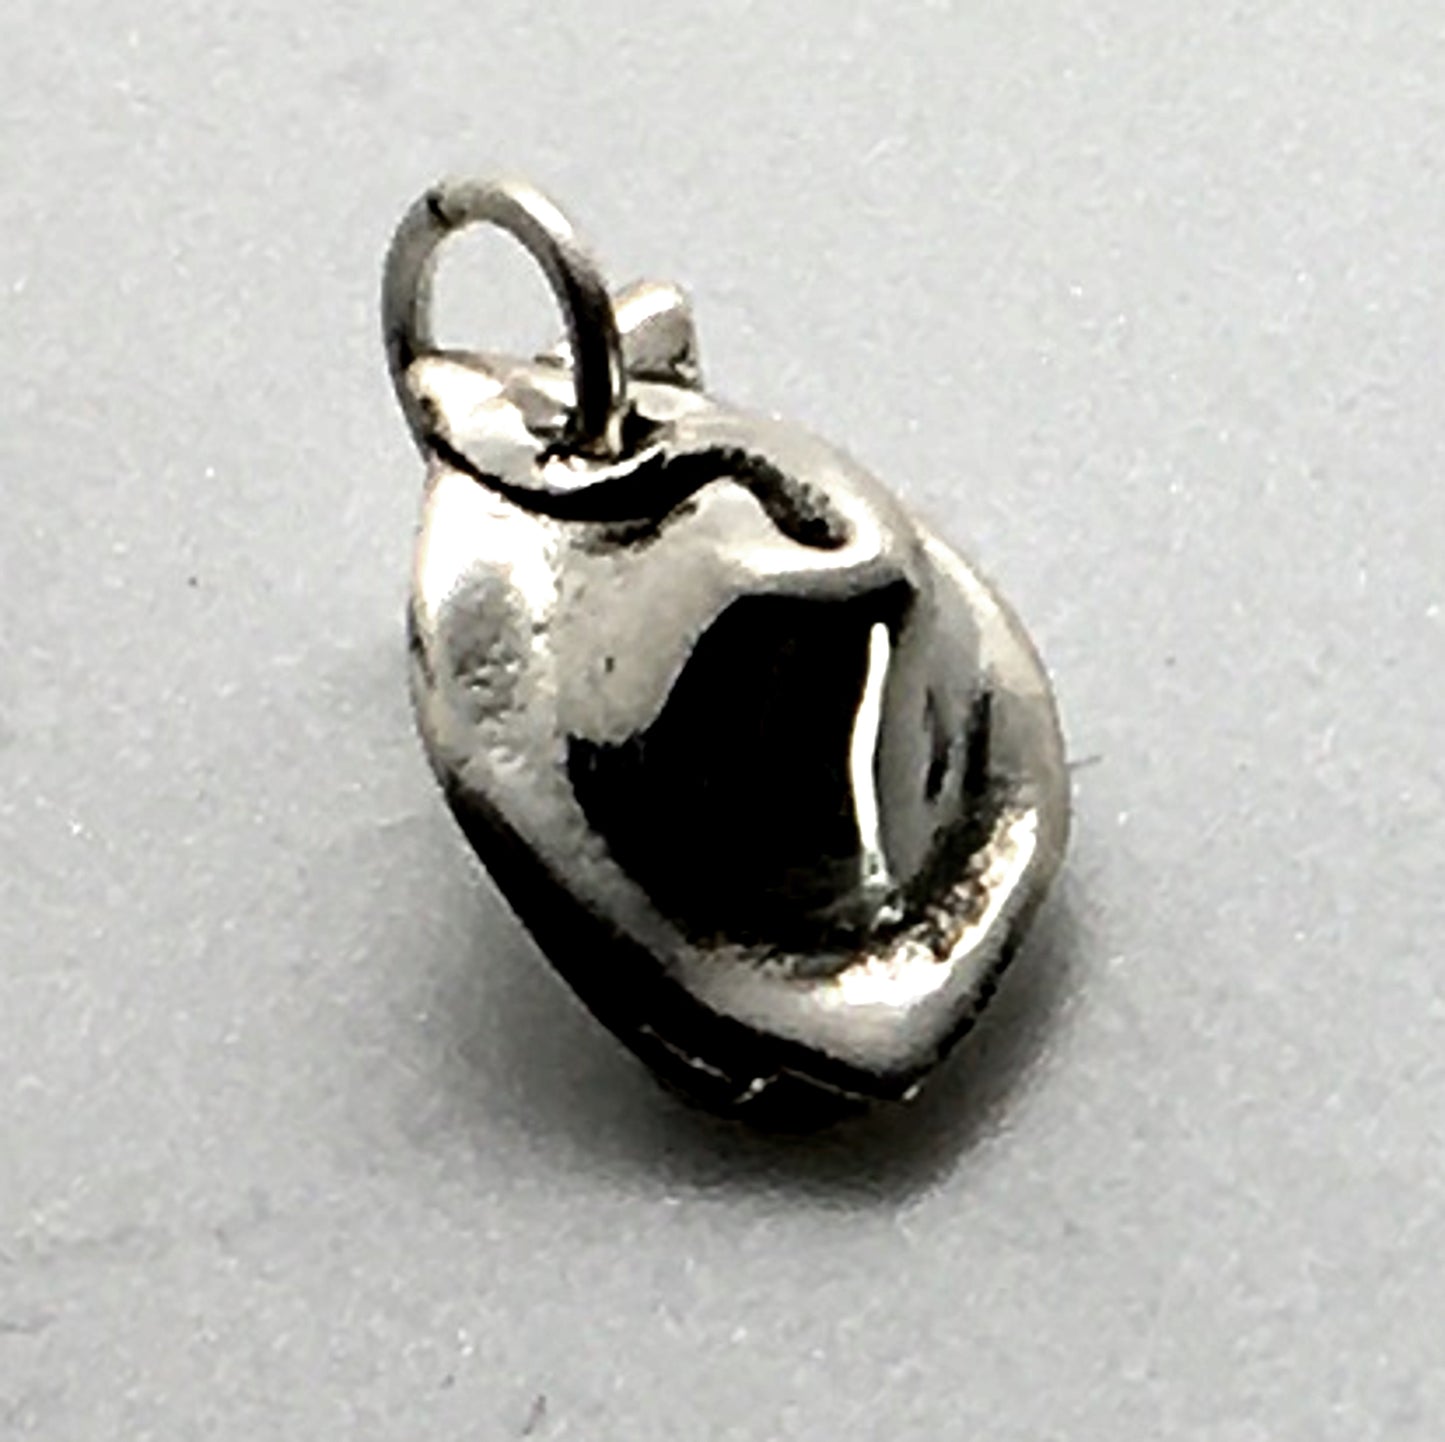 Chinese Wonton Dumpling Charm in Sterling Silver